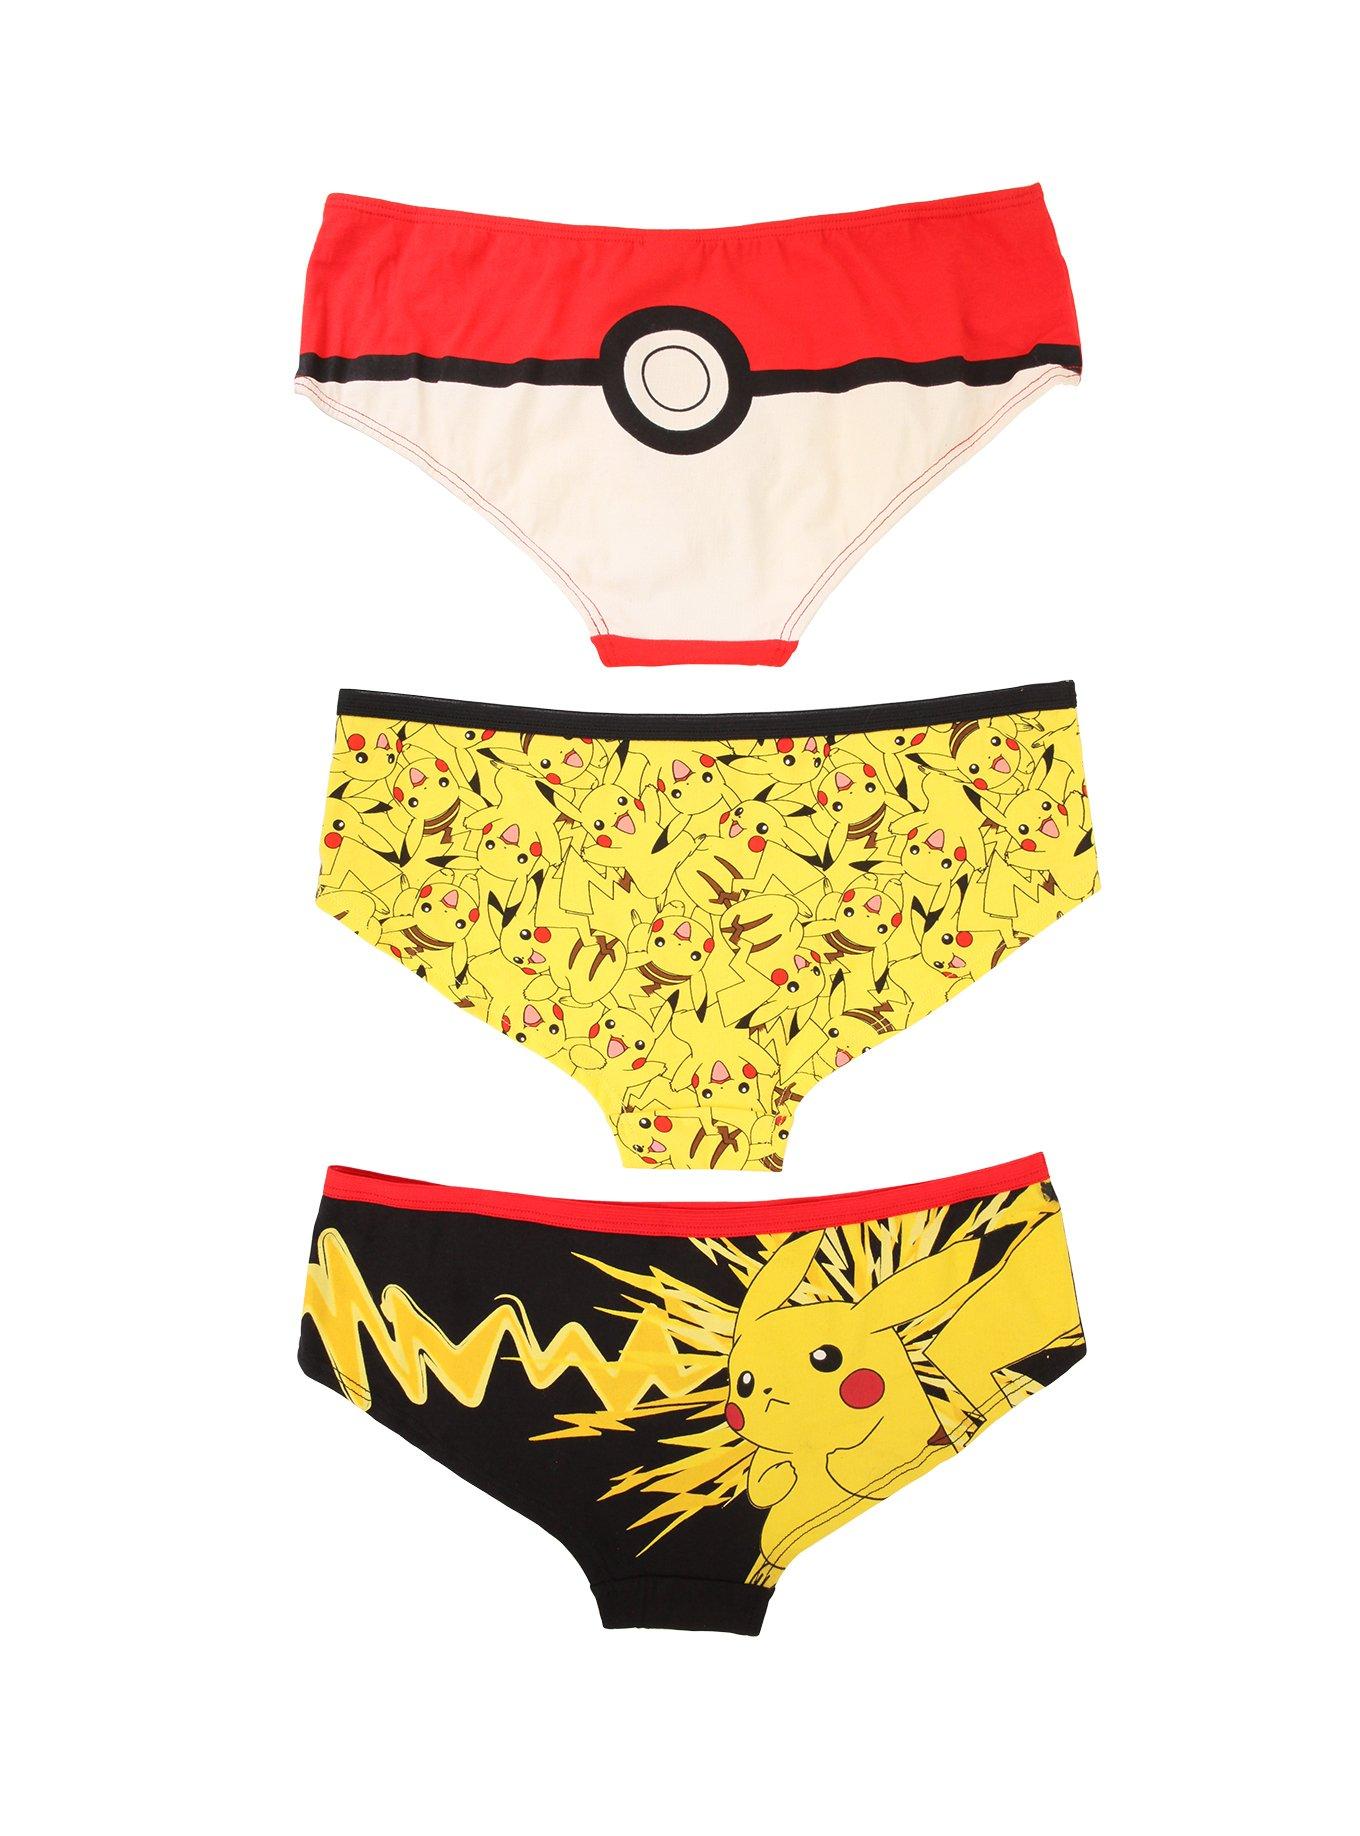 Buy Pokemon Squirtle T-back Girl Underwear Cheap Thong Online at